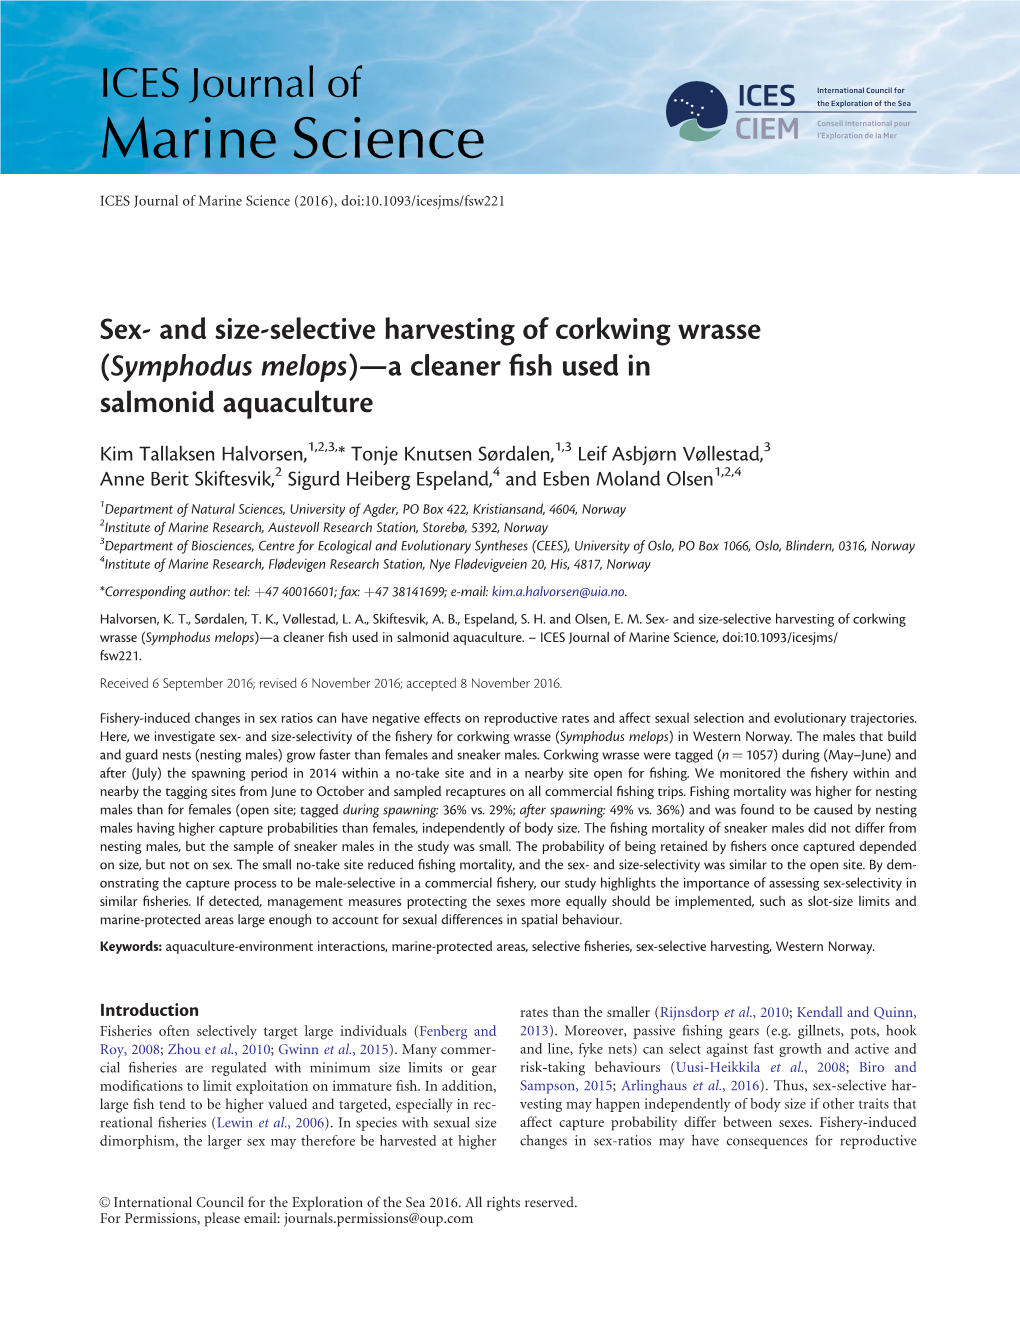 Sex- and Size-Selective Harvesting of Corkwing Wrasse (Symphodus Melops)—A Cleaner ﬁsh Used in Salmonid Aquaculture